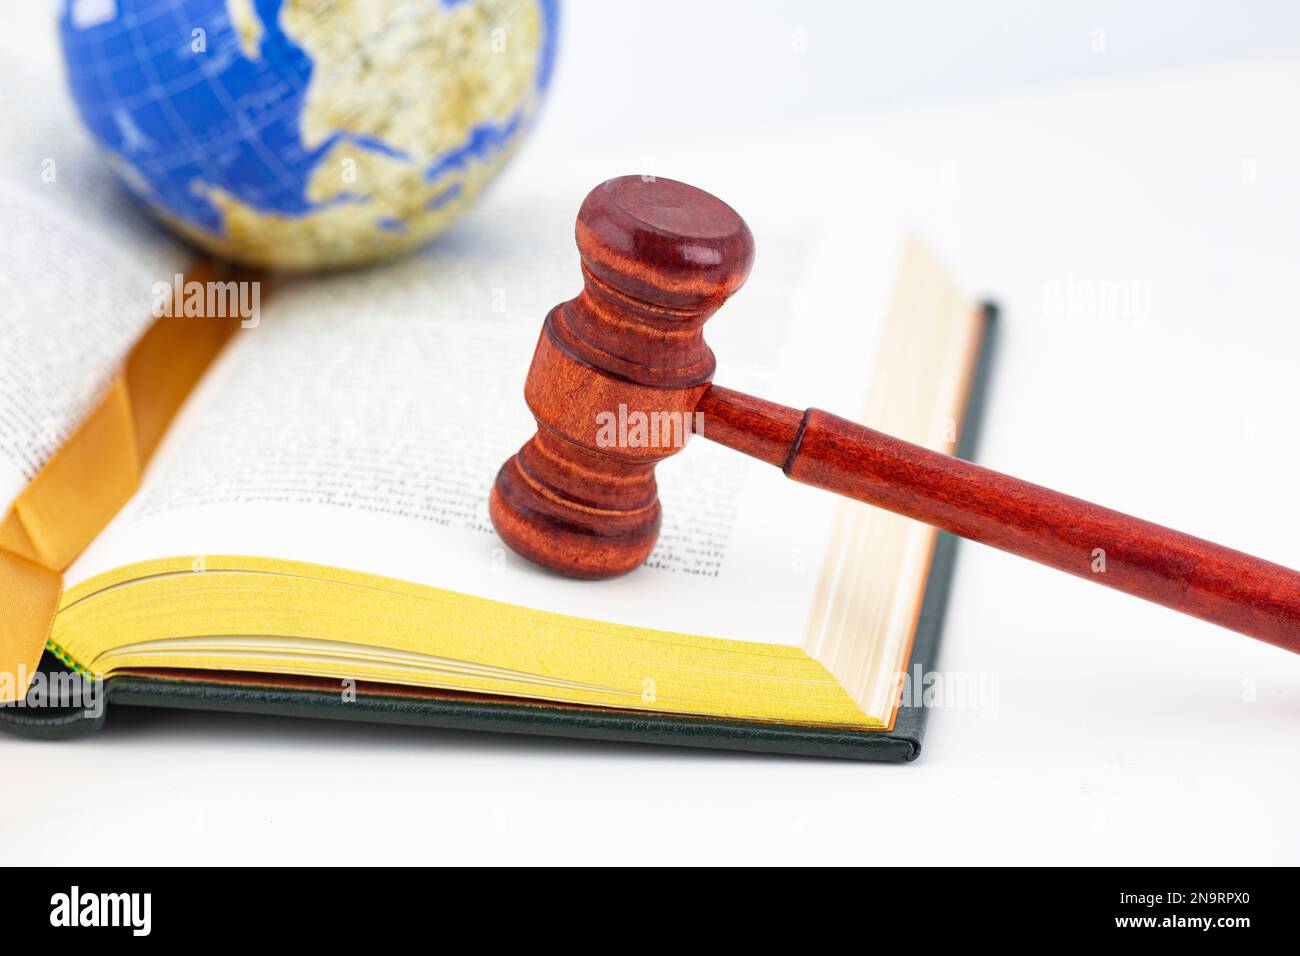 Book with gold edges, wood gavel, and globe placed on white background hold global justice and worldwide equity concepts Stock Photo